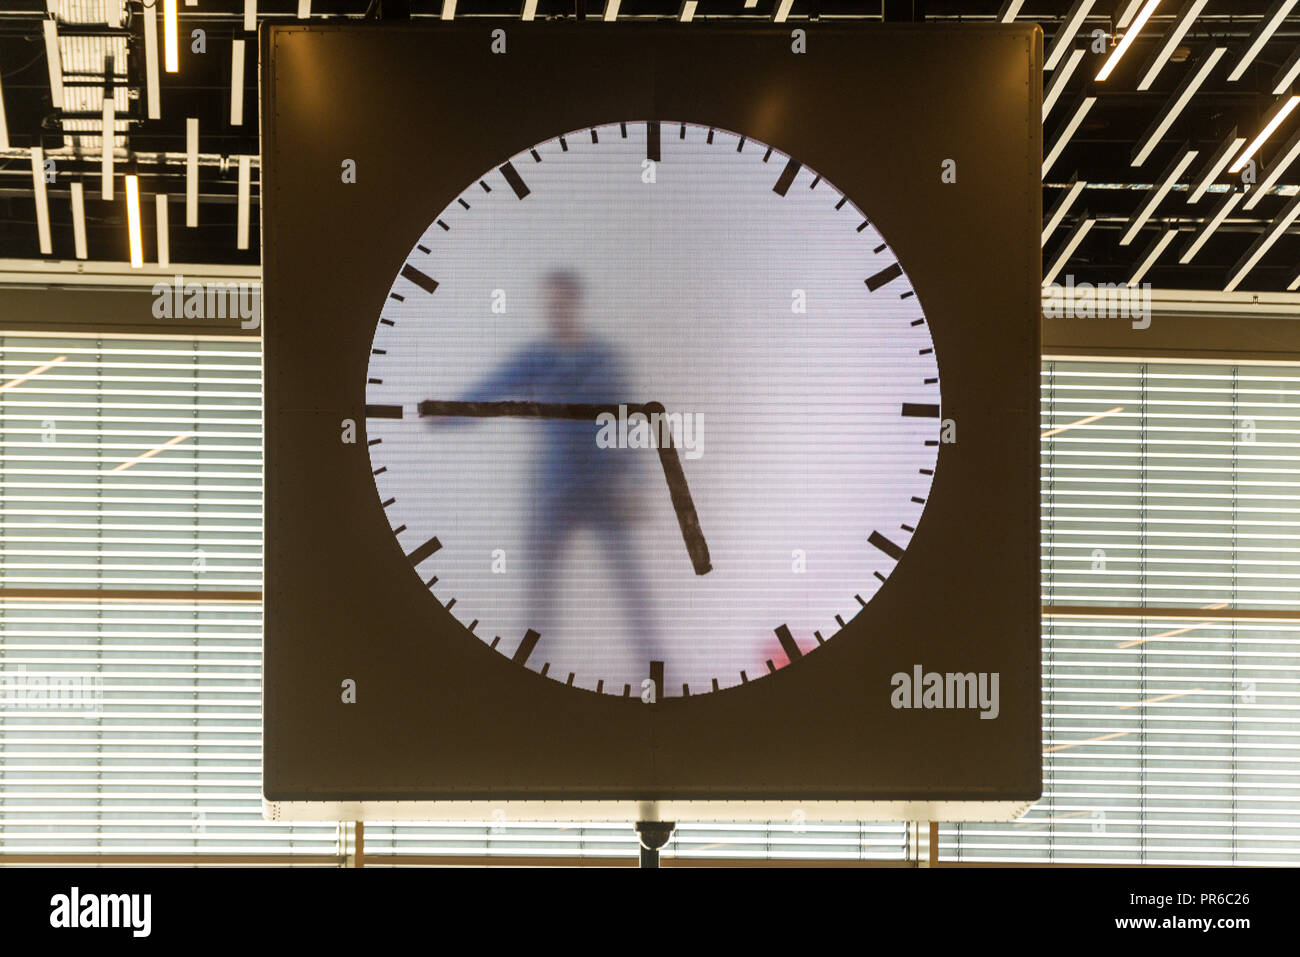 Schiphol clock hi-res stock and images - Alamy